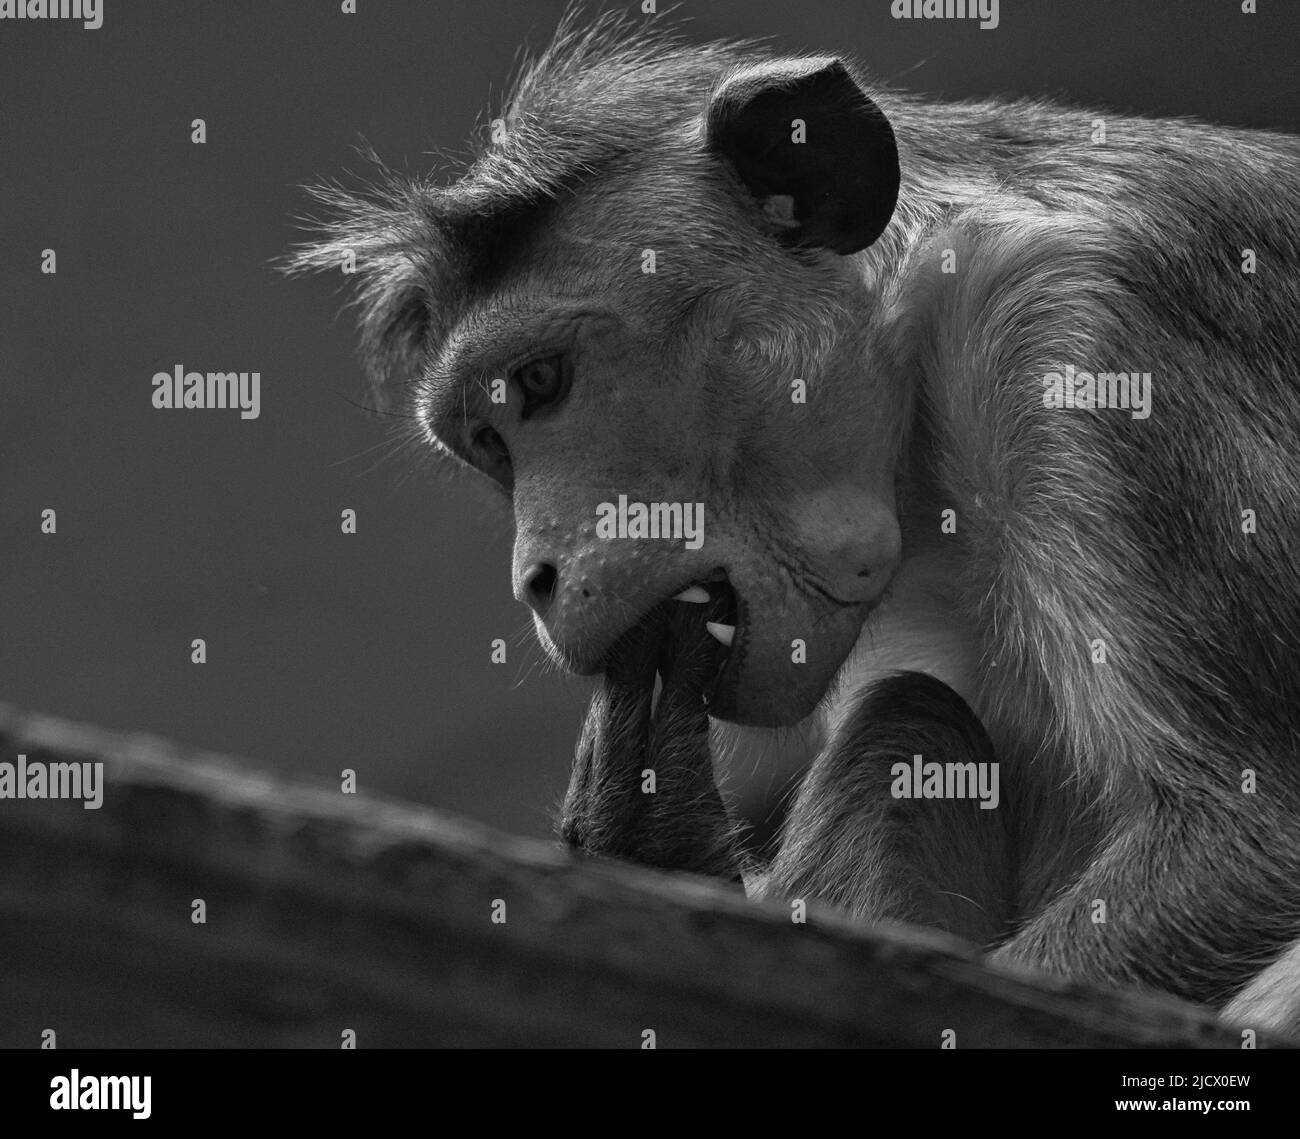 Rhesus monkey in black white sitting on a branch and nibbling on his tail. animal photo of a mammal Stock Photo